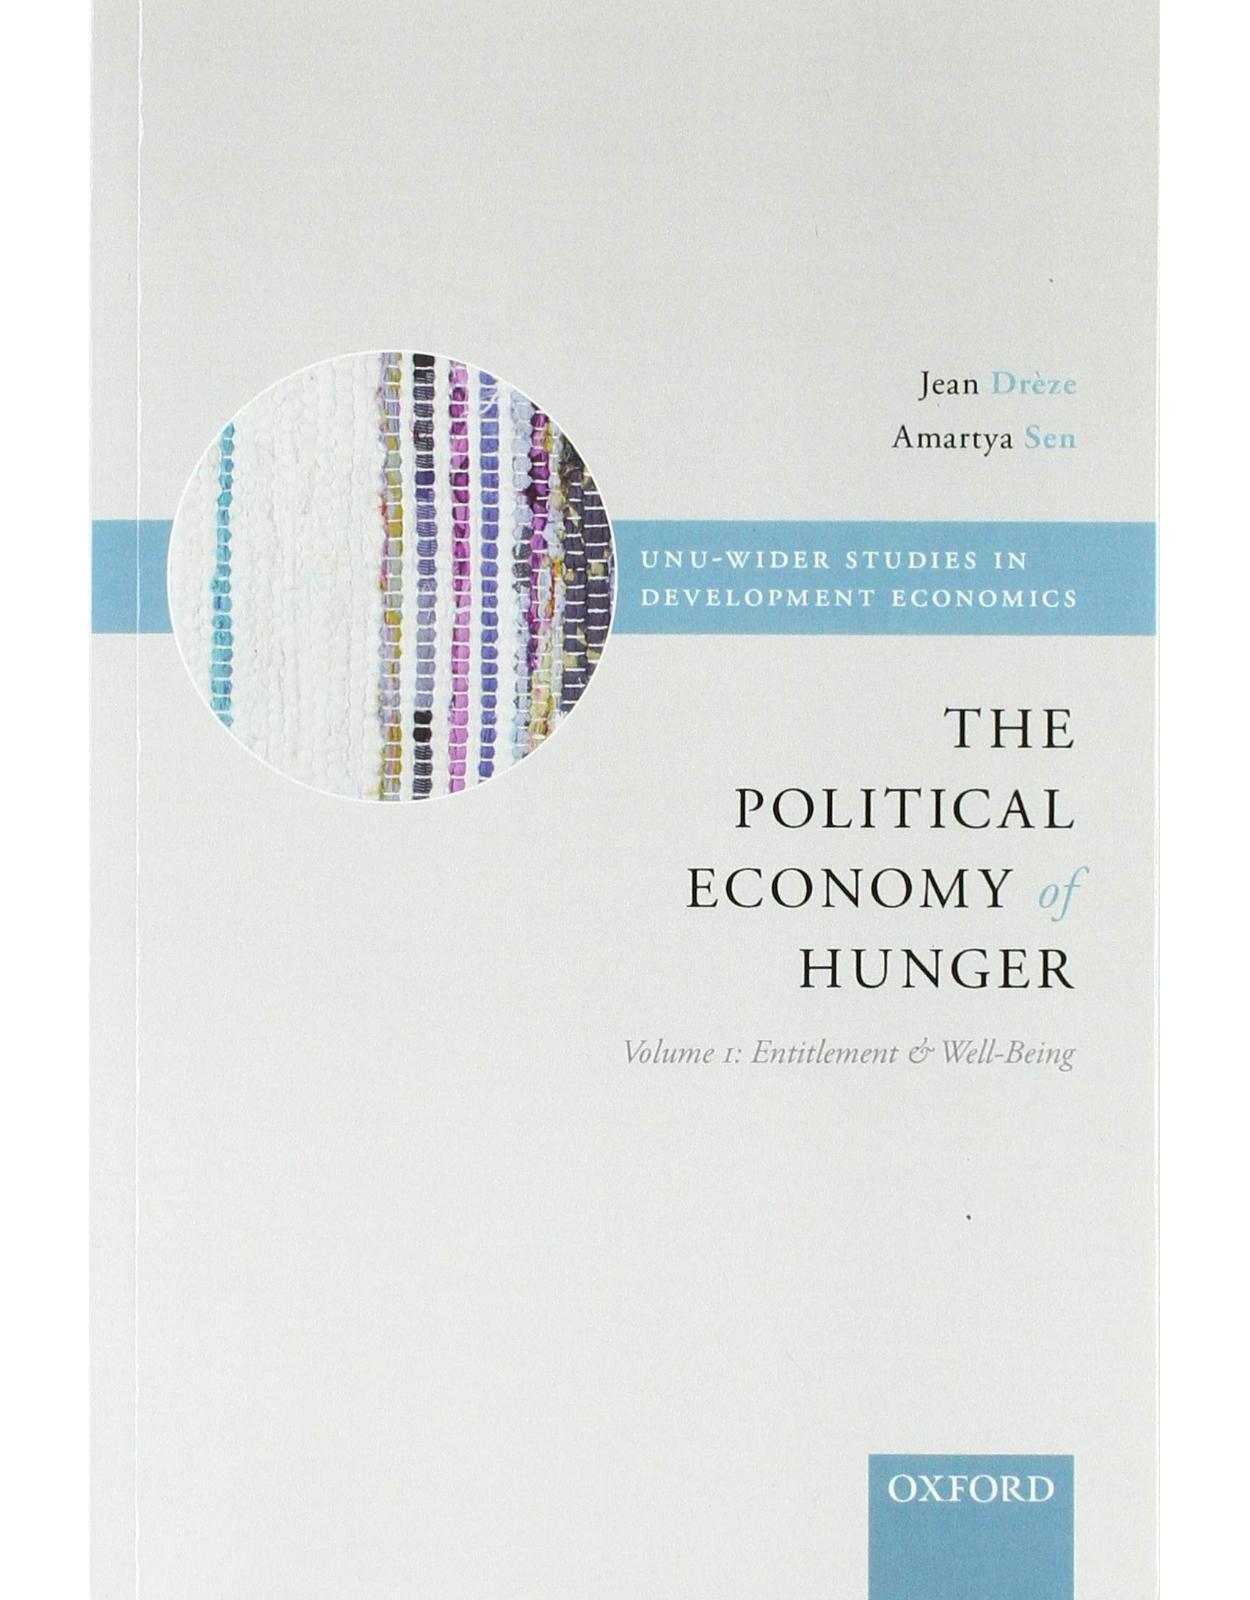 Political Economy of Hunger, Vol. 1